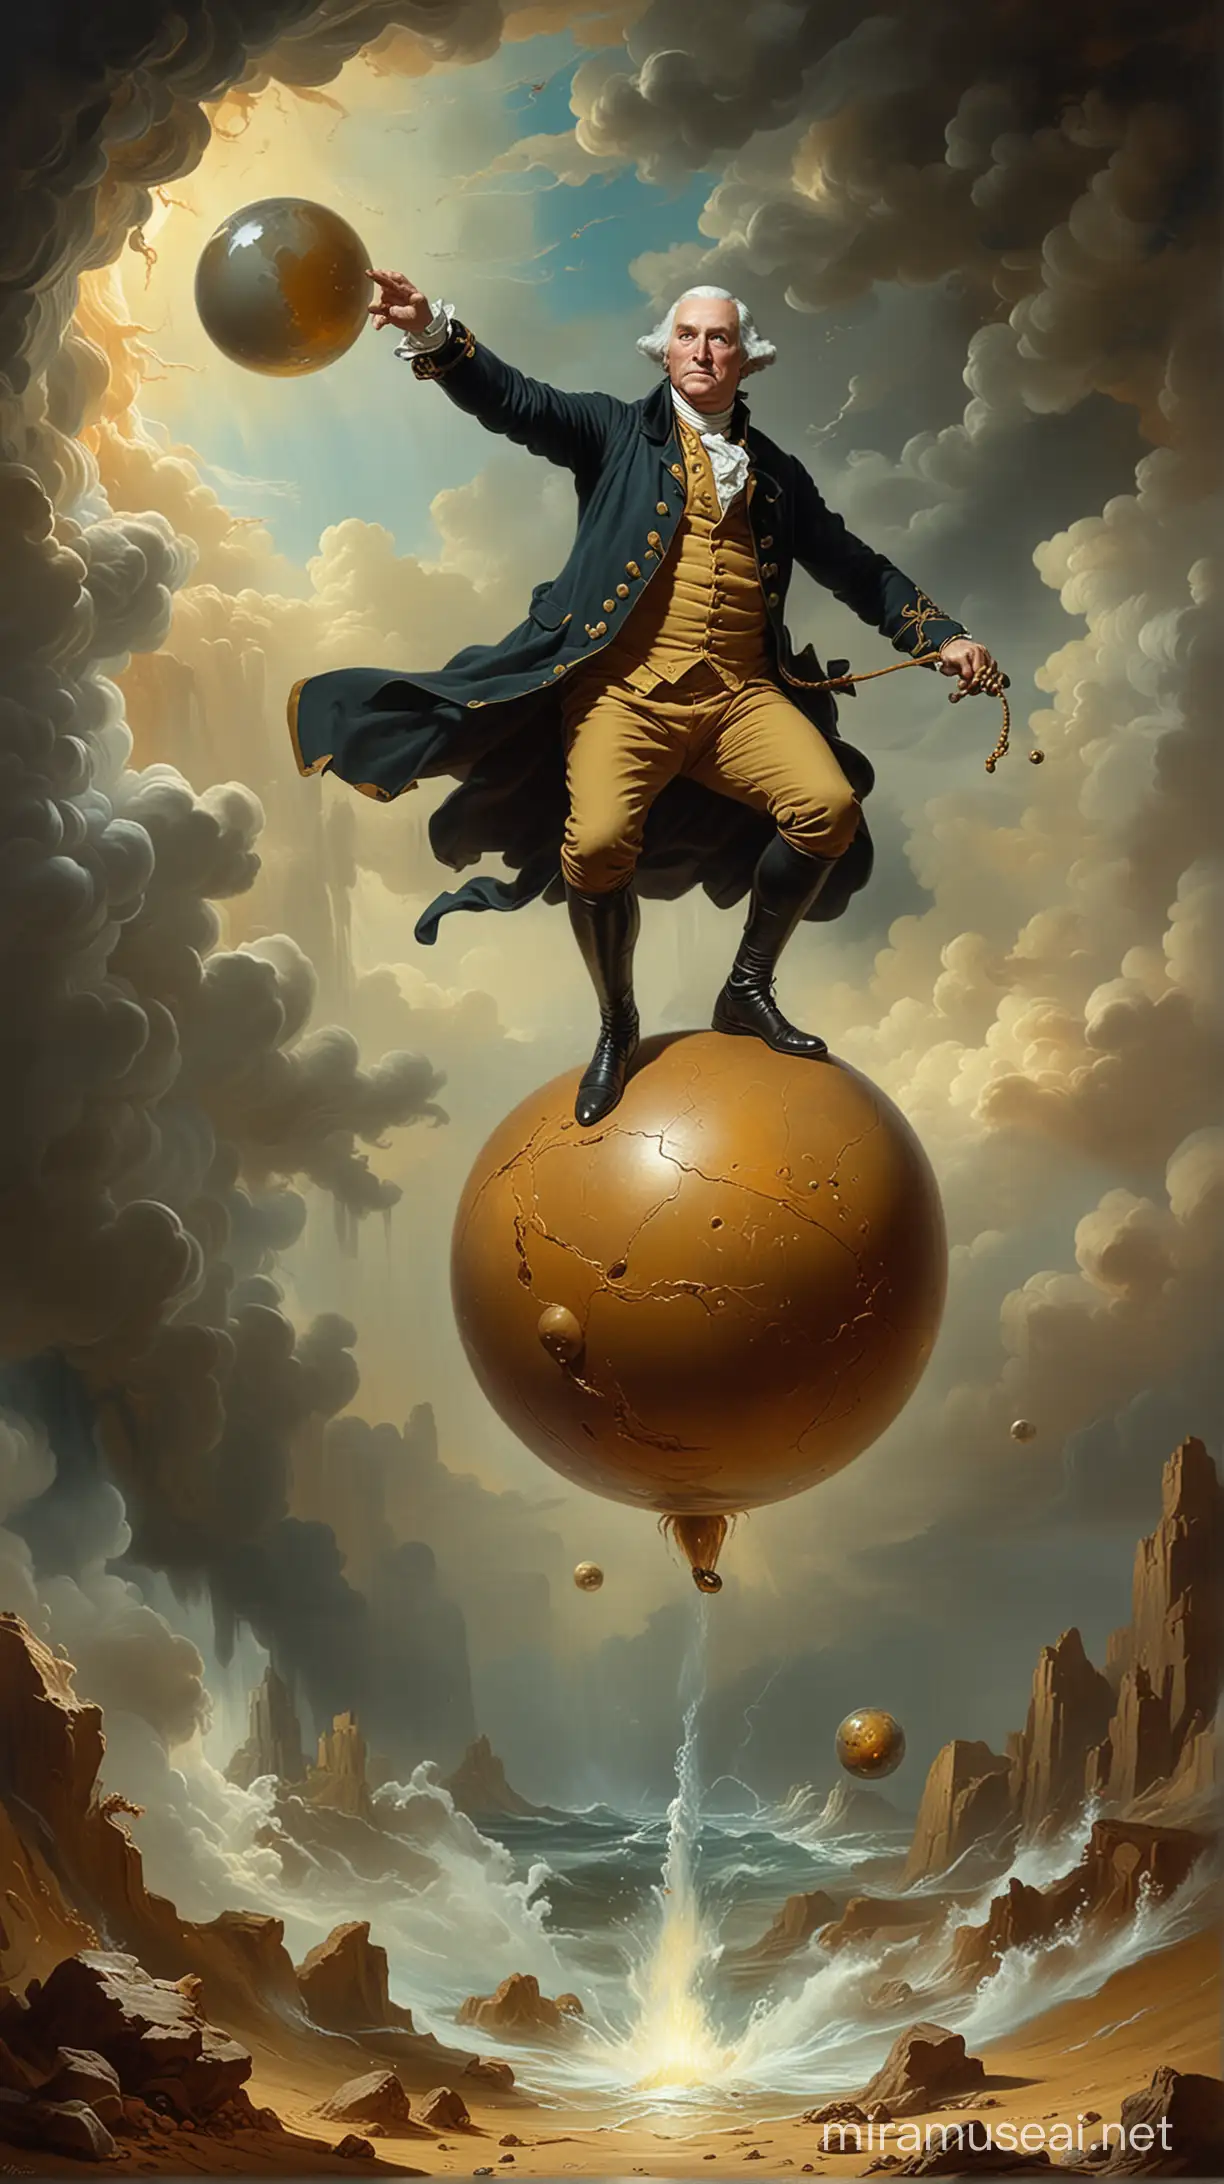 Surreal Portrait George Washington Descending into Hell on a Bouncing Ball